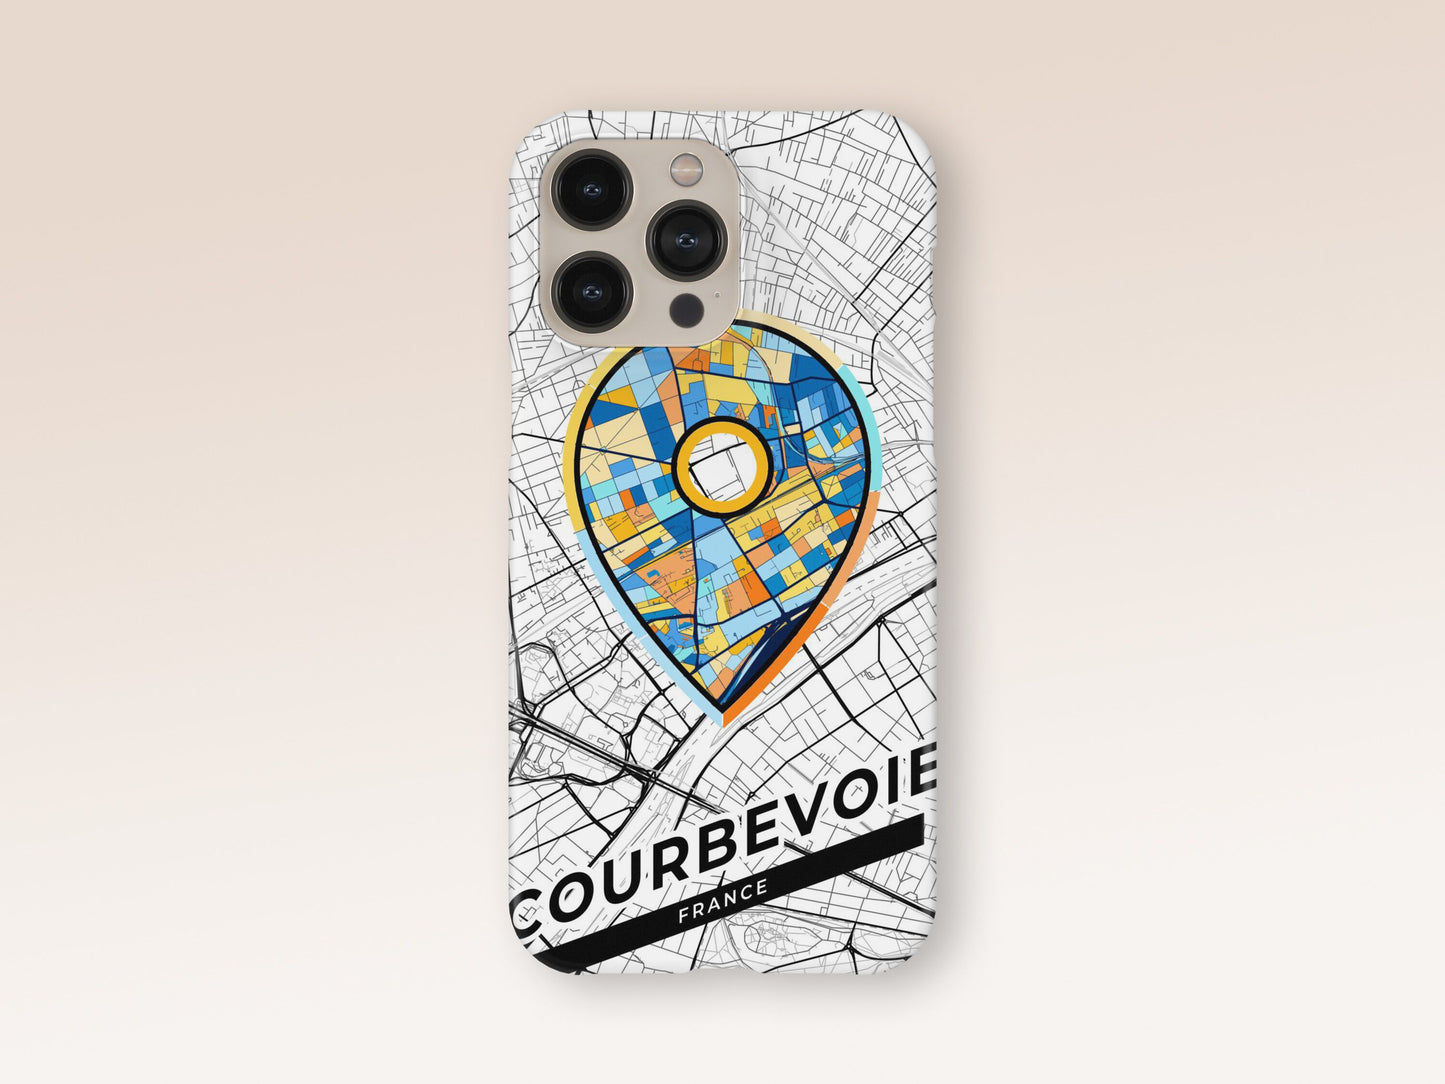 Courbevoie France slim phone case with colorful icon. Birthday, wedding or housewarming gift. Couple match cases. 1